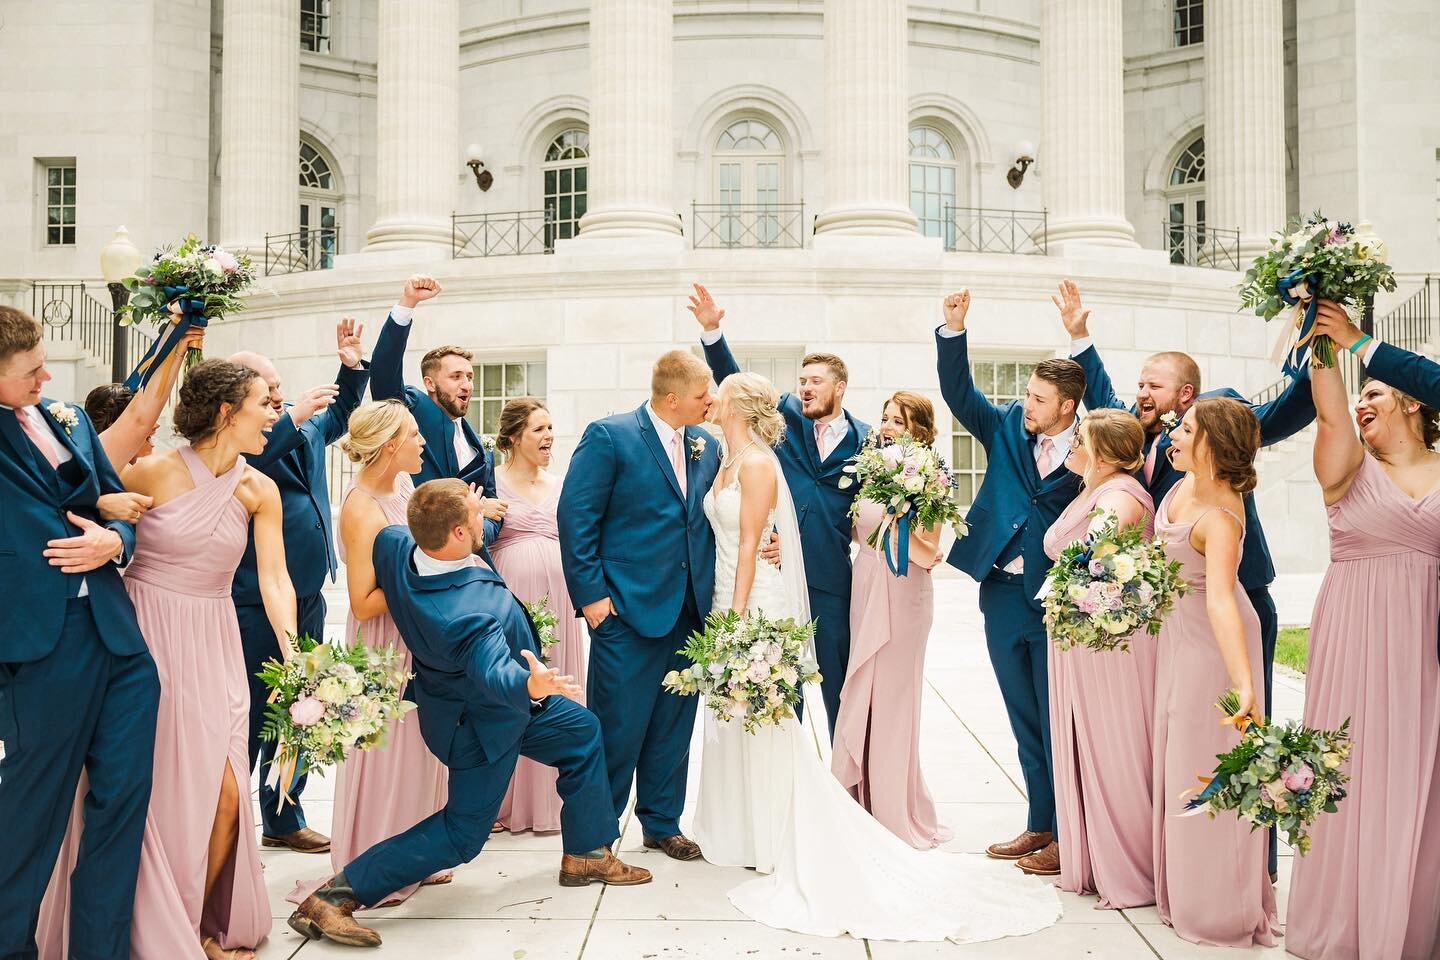 🎉PSA🎉 if you&rsquo;re getting married next year and you want to have *this* much fun on your wedding day, reach out asap! I get SO sad turning away a couple I&rsquo;d love to work with because I&rsquo;m already booked on their date. 😢